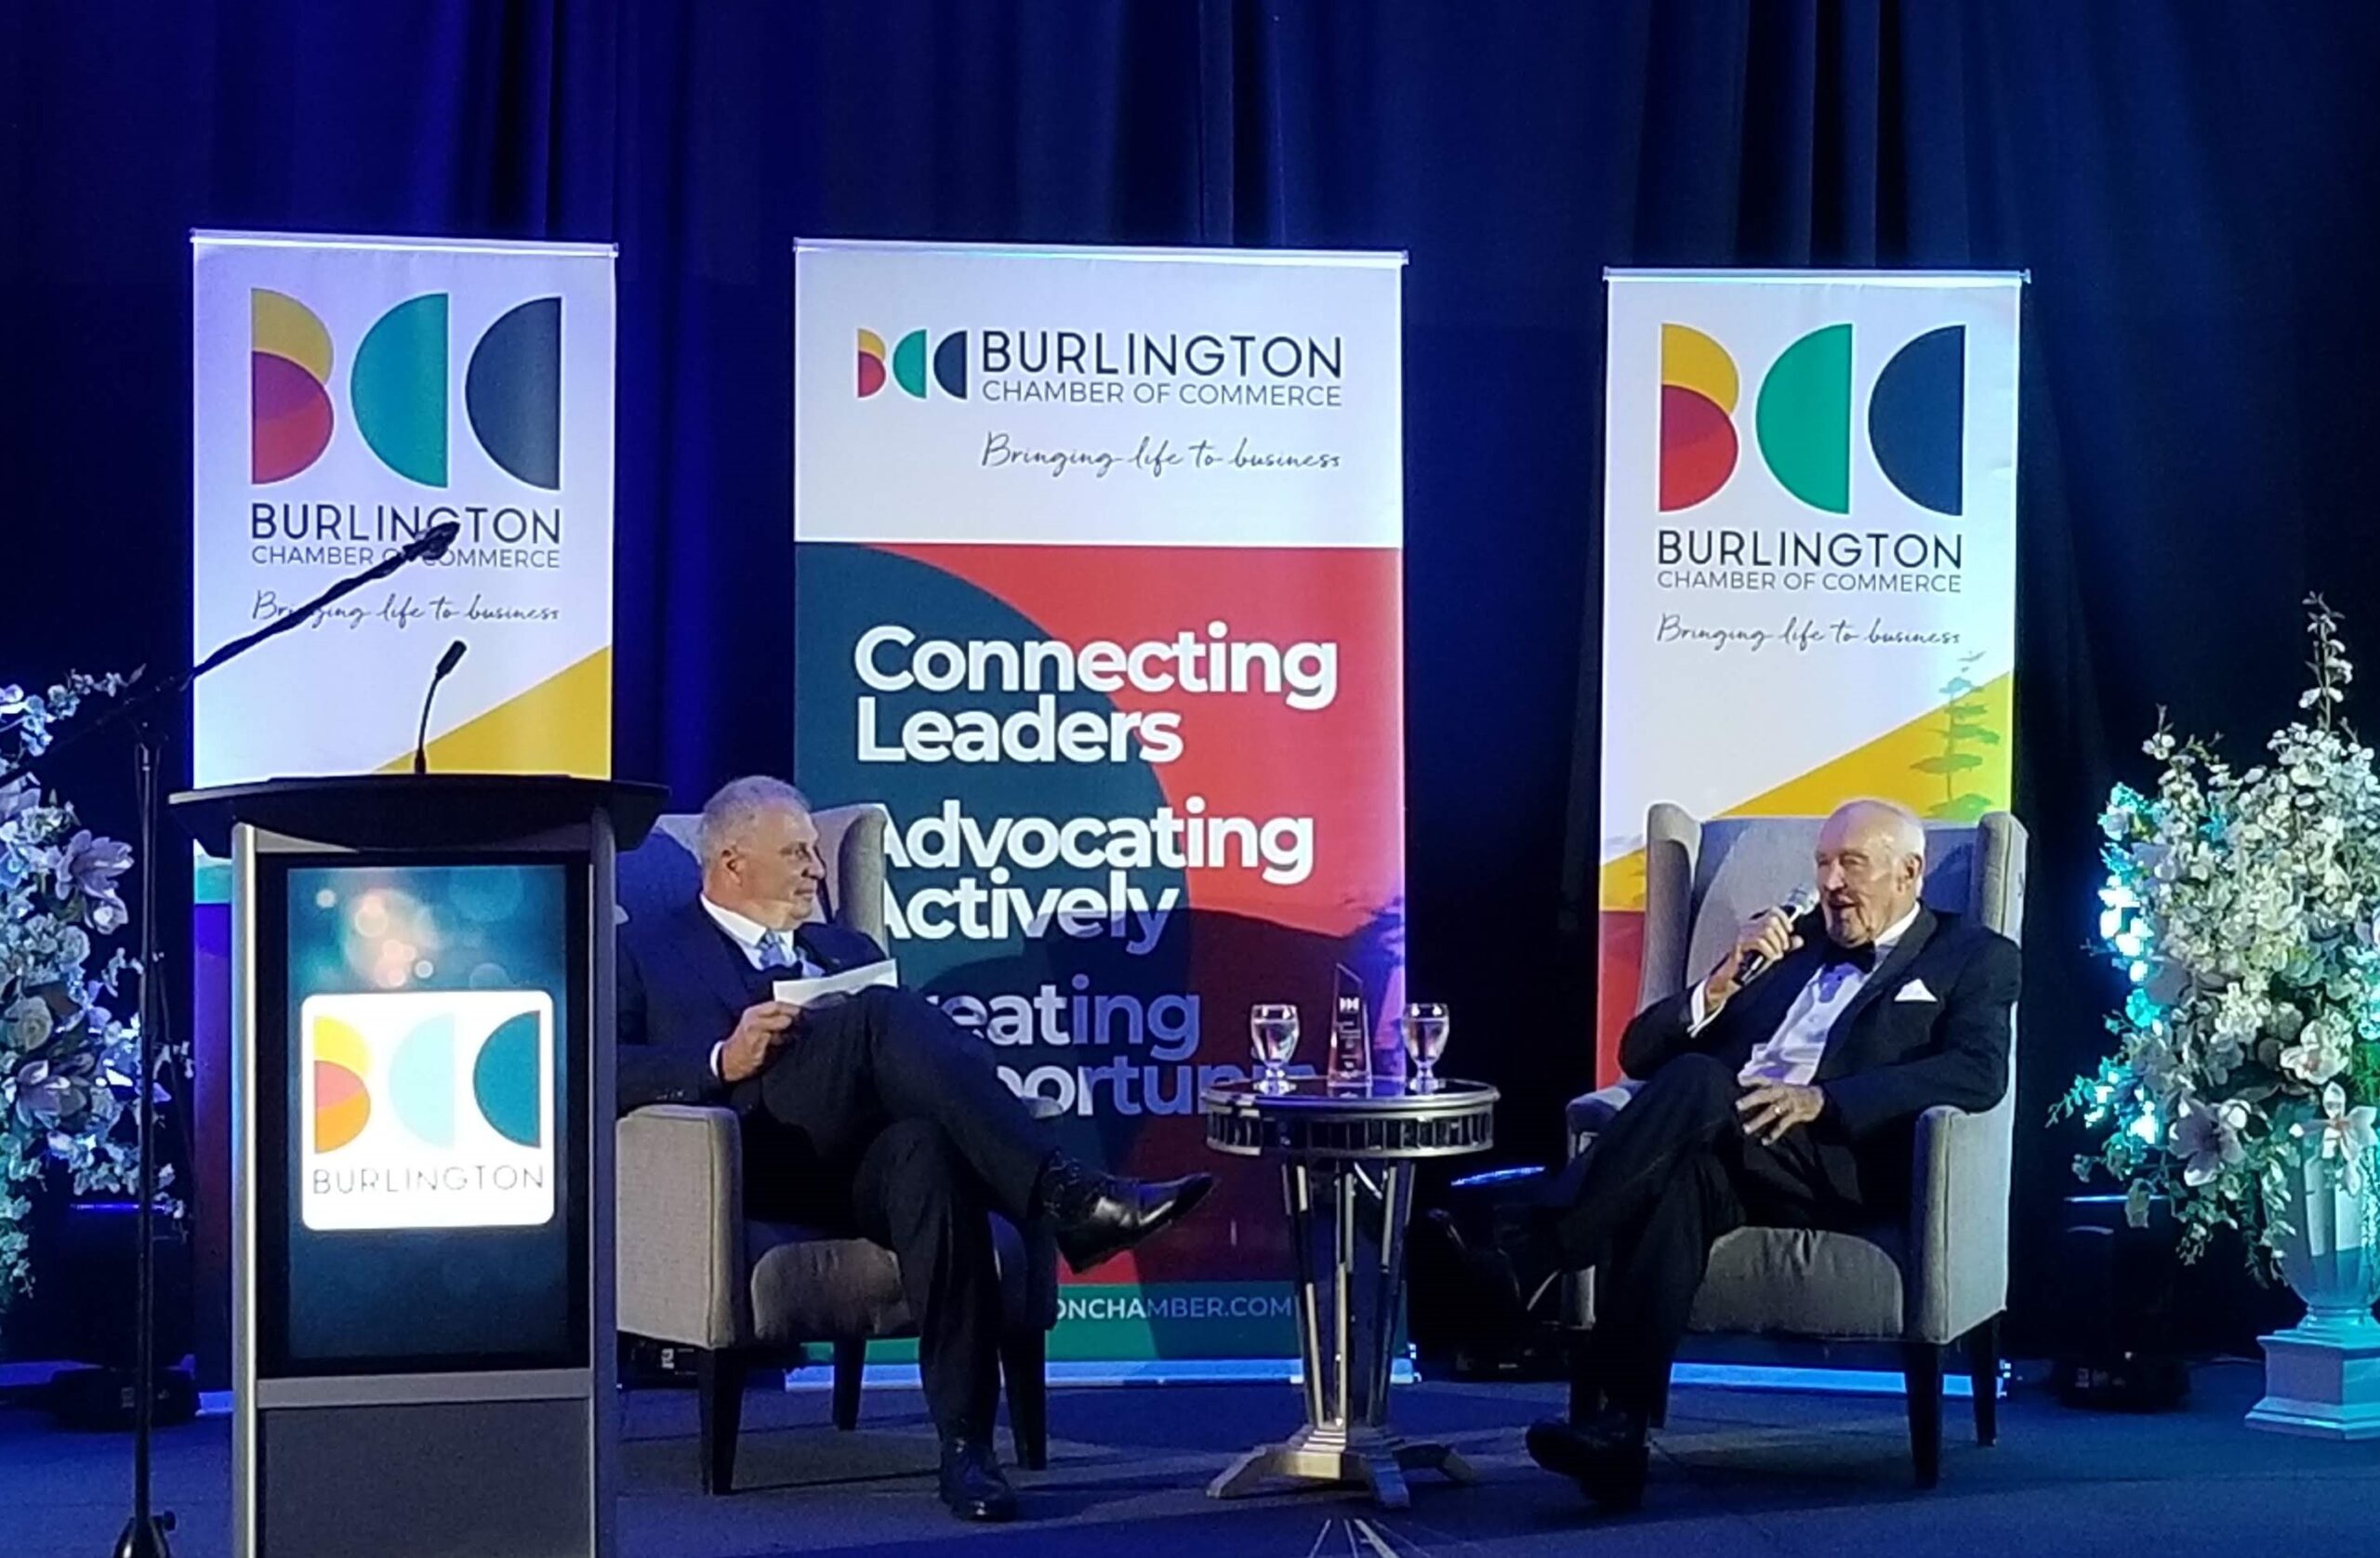 Two men sit in arm chairs in front of three standing signs. The man on the right is speaking into a microphone. The signs are printed with the Burlington Chamber of Commerce name and logo.